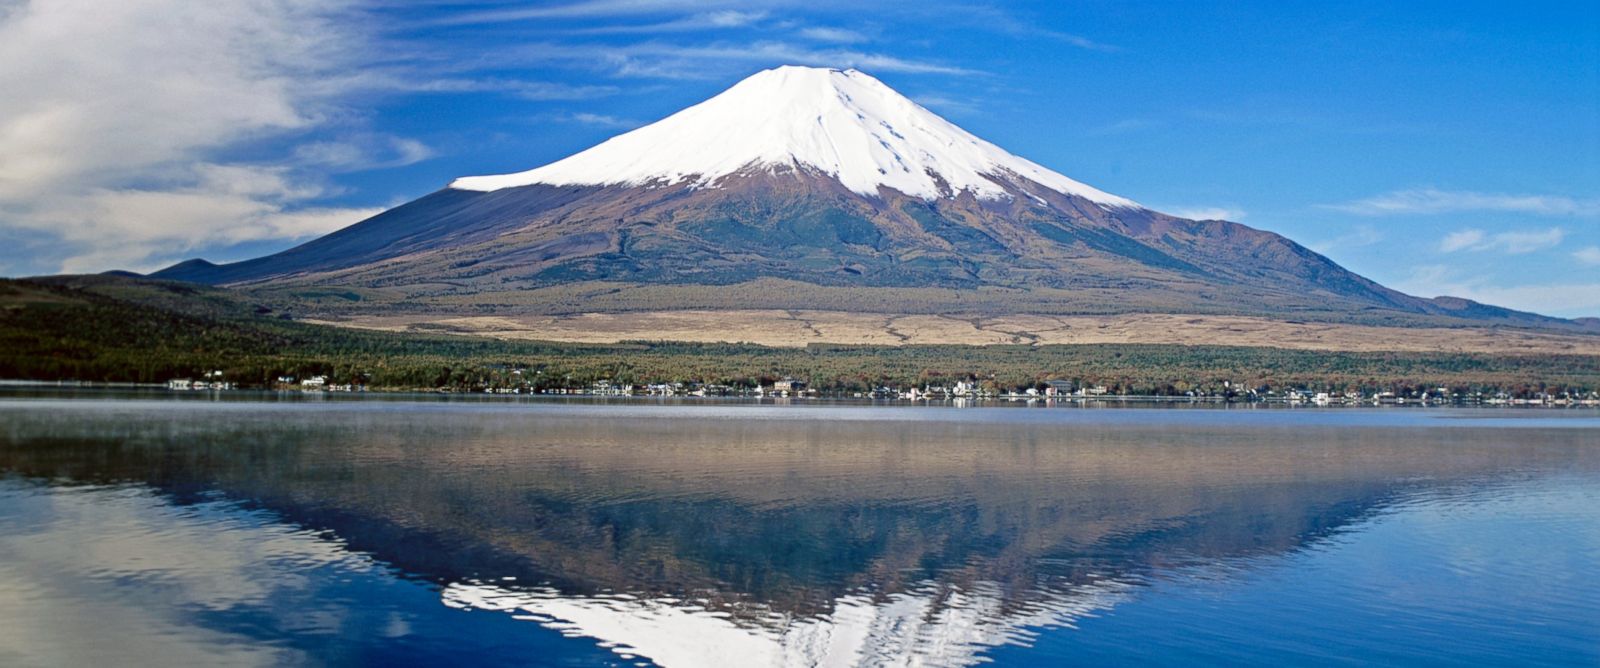 Mount Fuji: Why More People Will Be Pulling Out Their Smartphones When